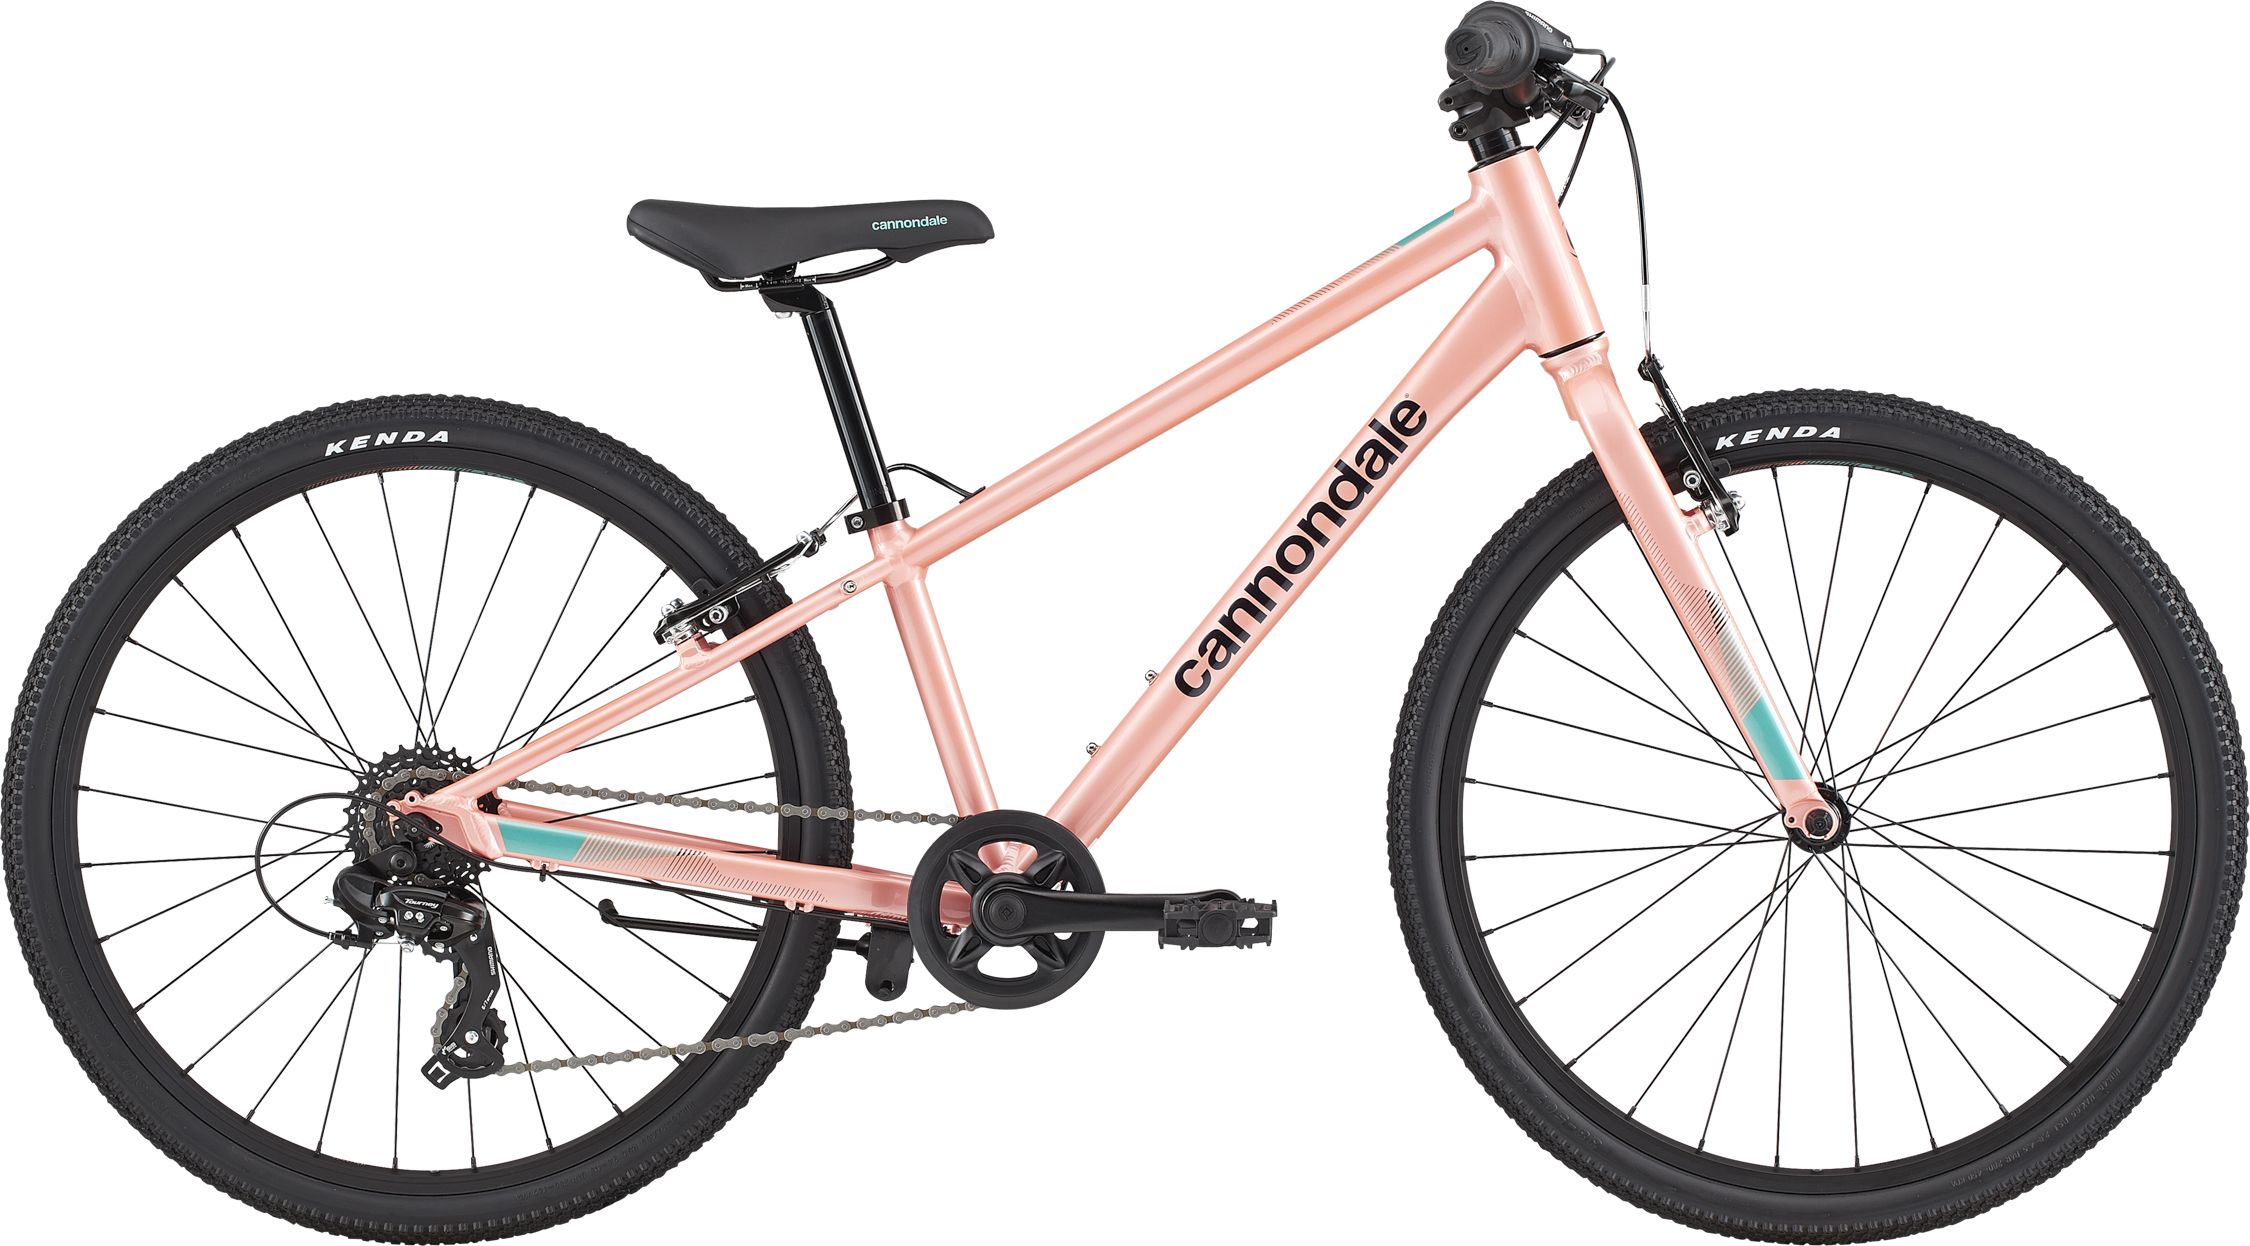 24 in girls bicycle